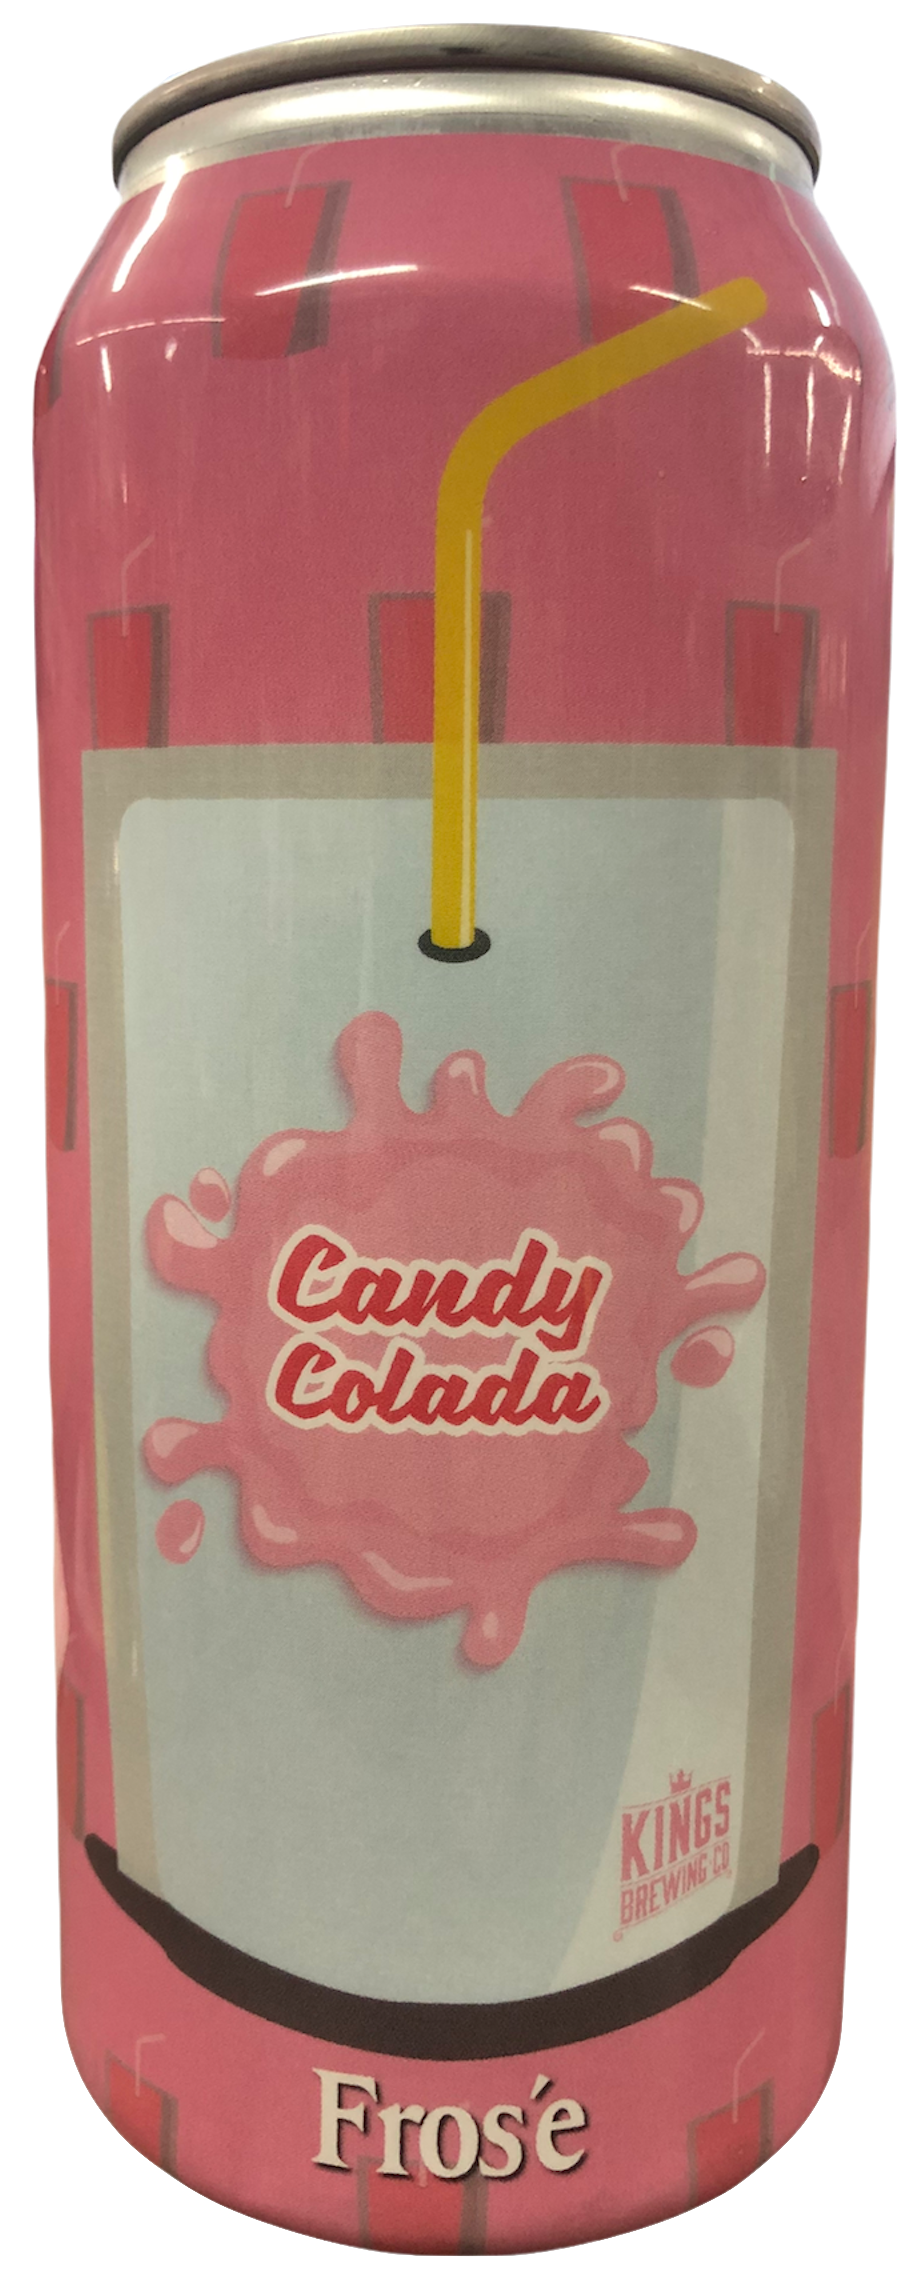 Buy Kings Candy Colada Fros'e Online -Craft City